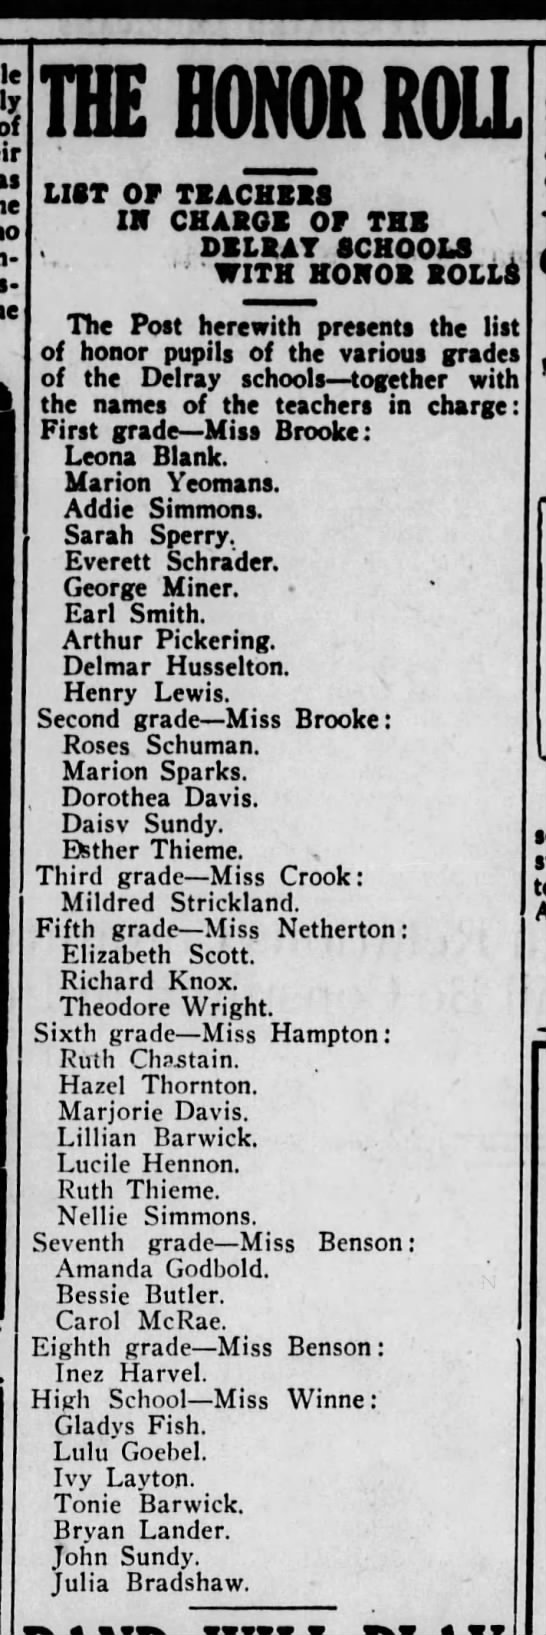 Honor roll students, 1916 - 